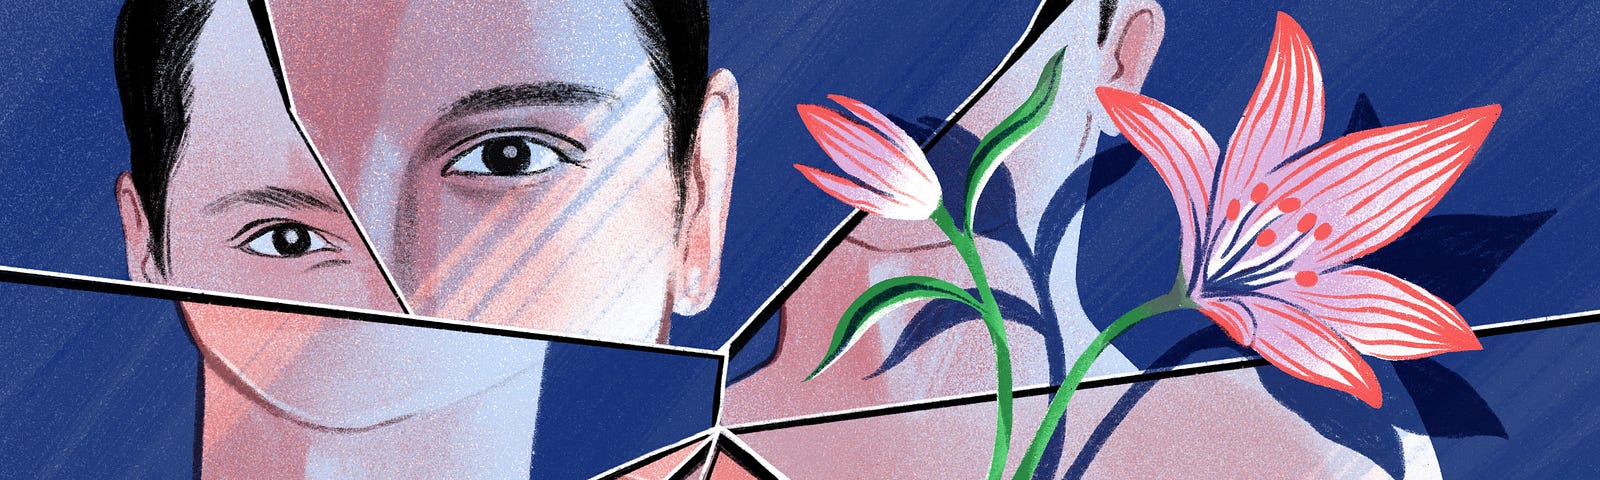 An illustration of a man looking at his reflection in glass that has been shattered by a lily.